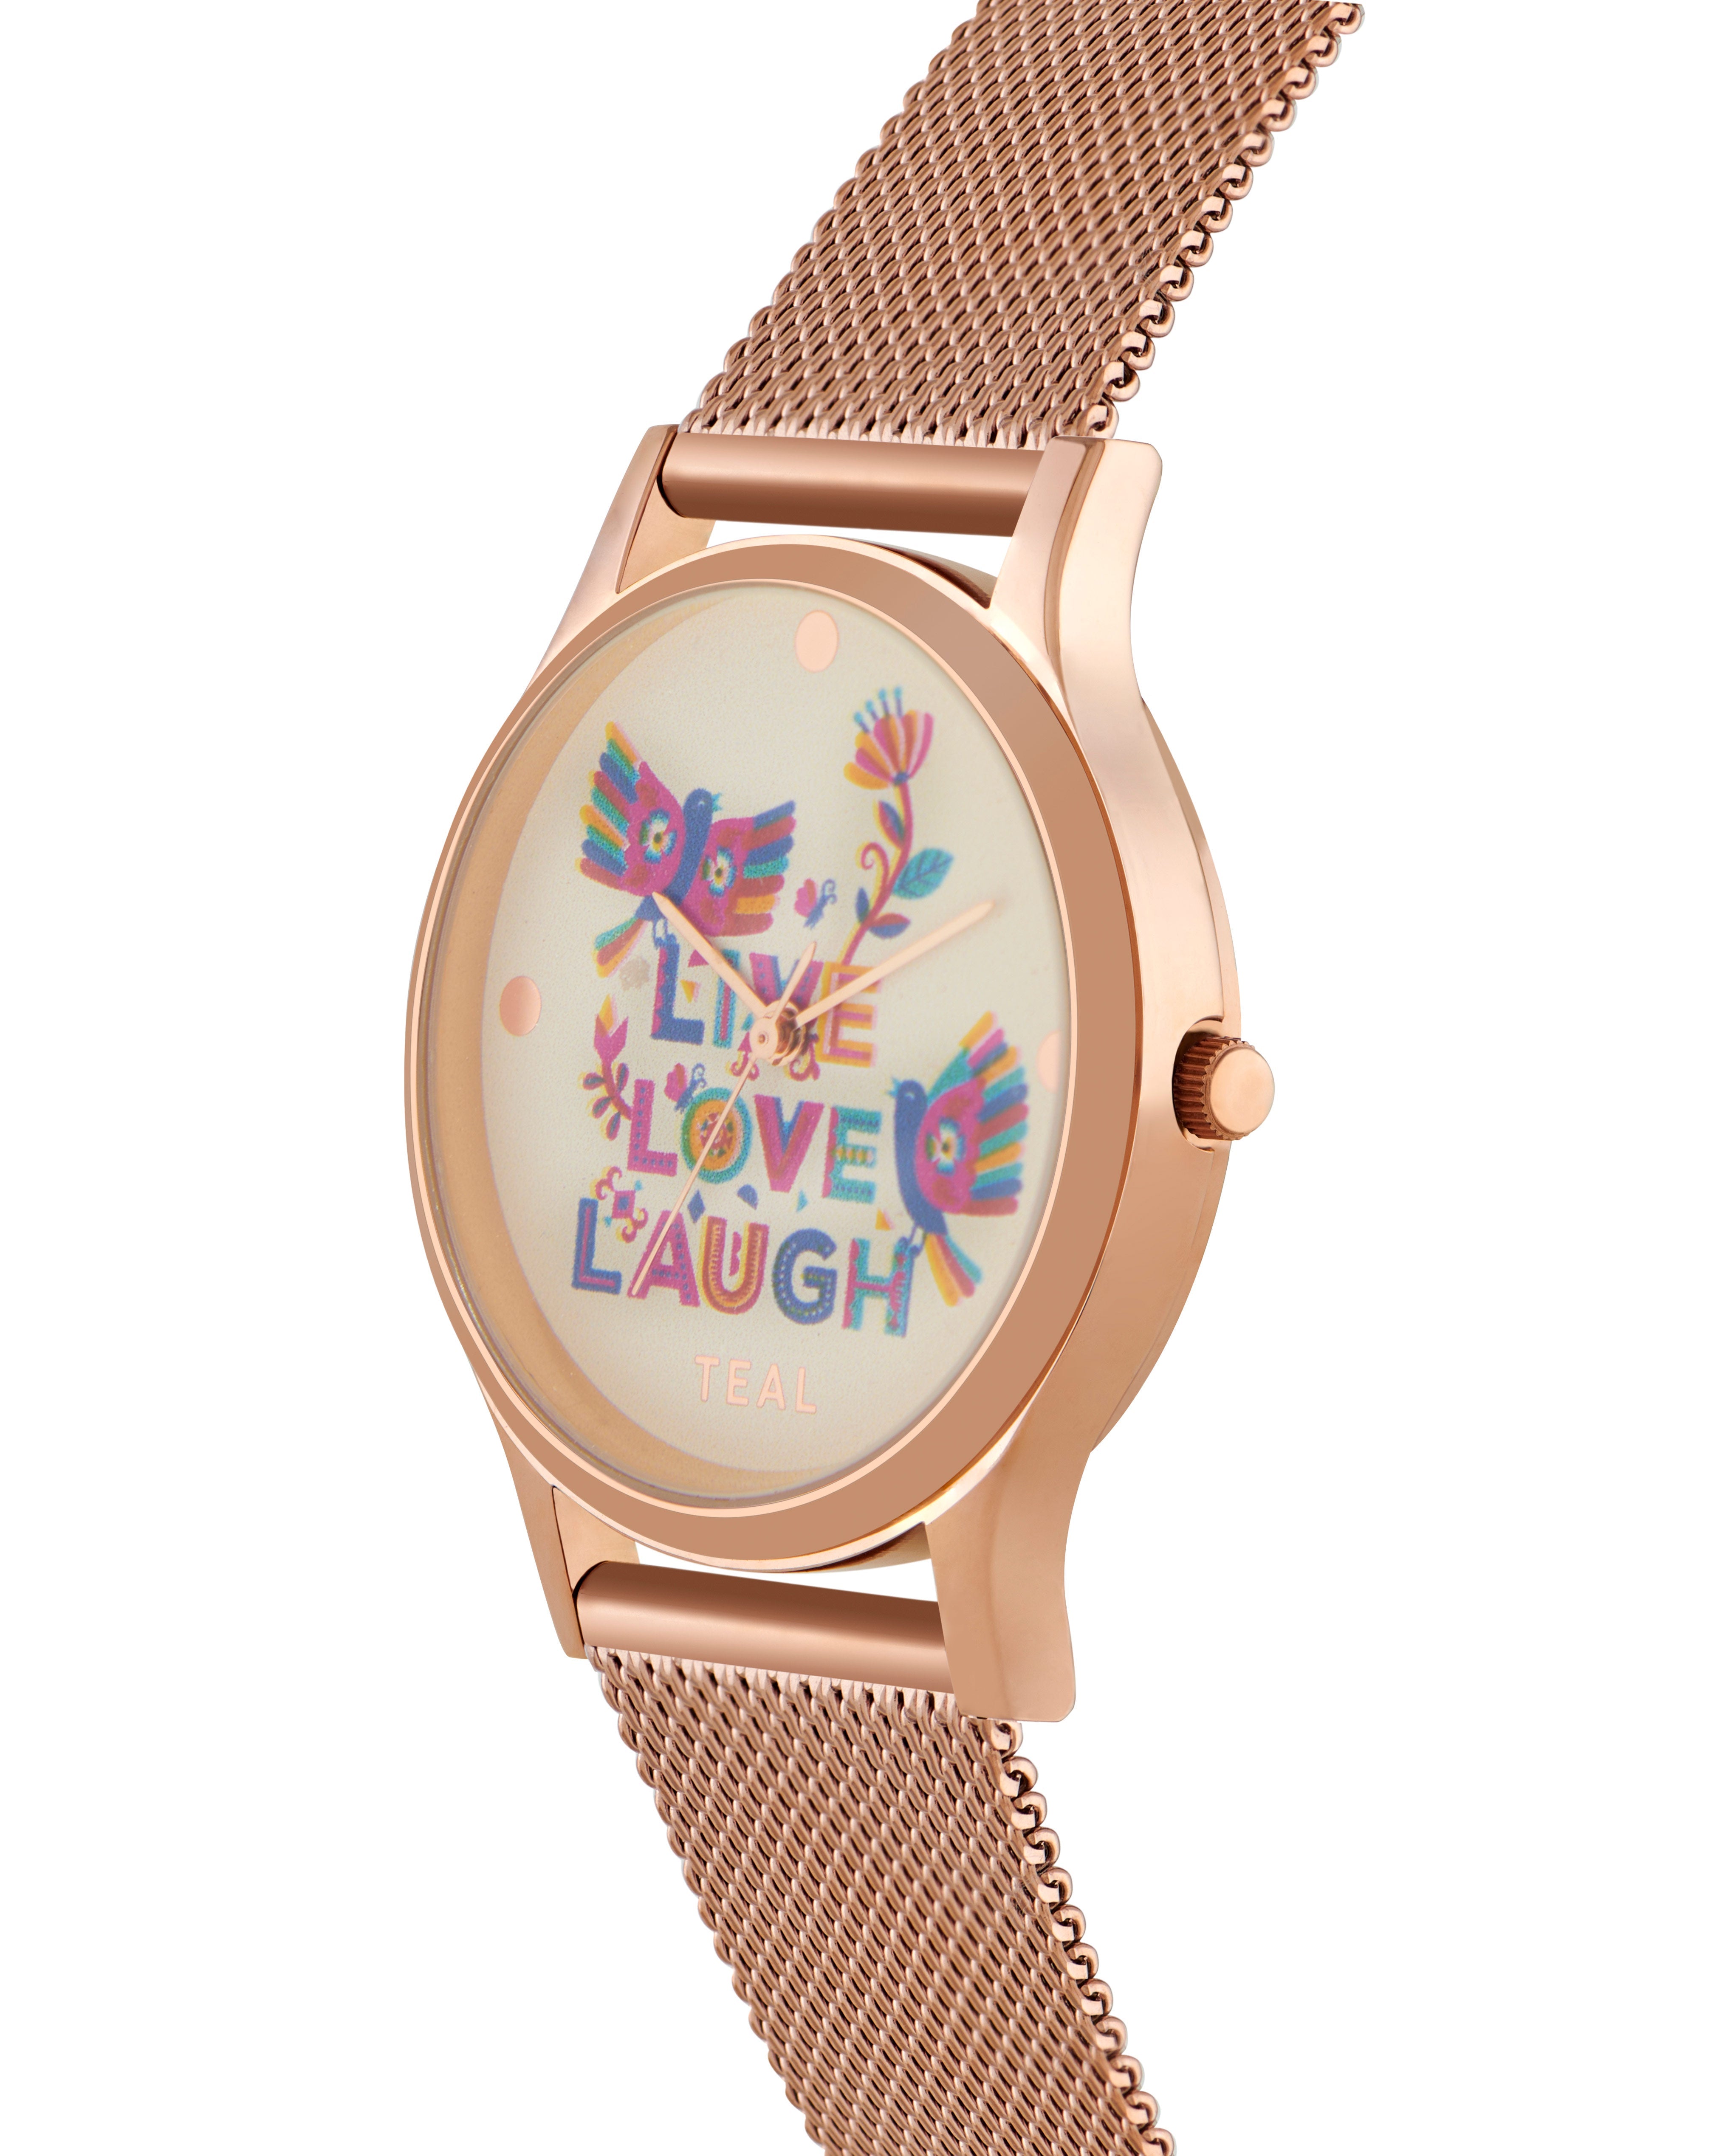 Teal By Chumbak | Live Love Laugh Watch -Metal Mesh Strap